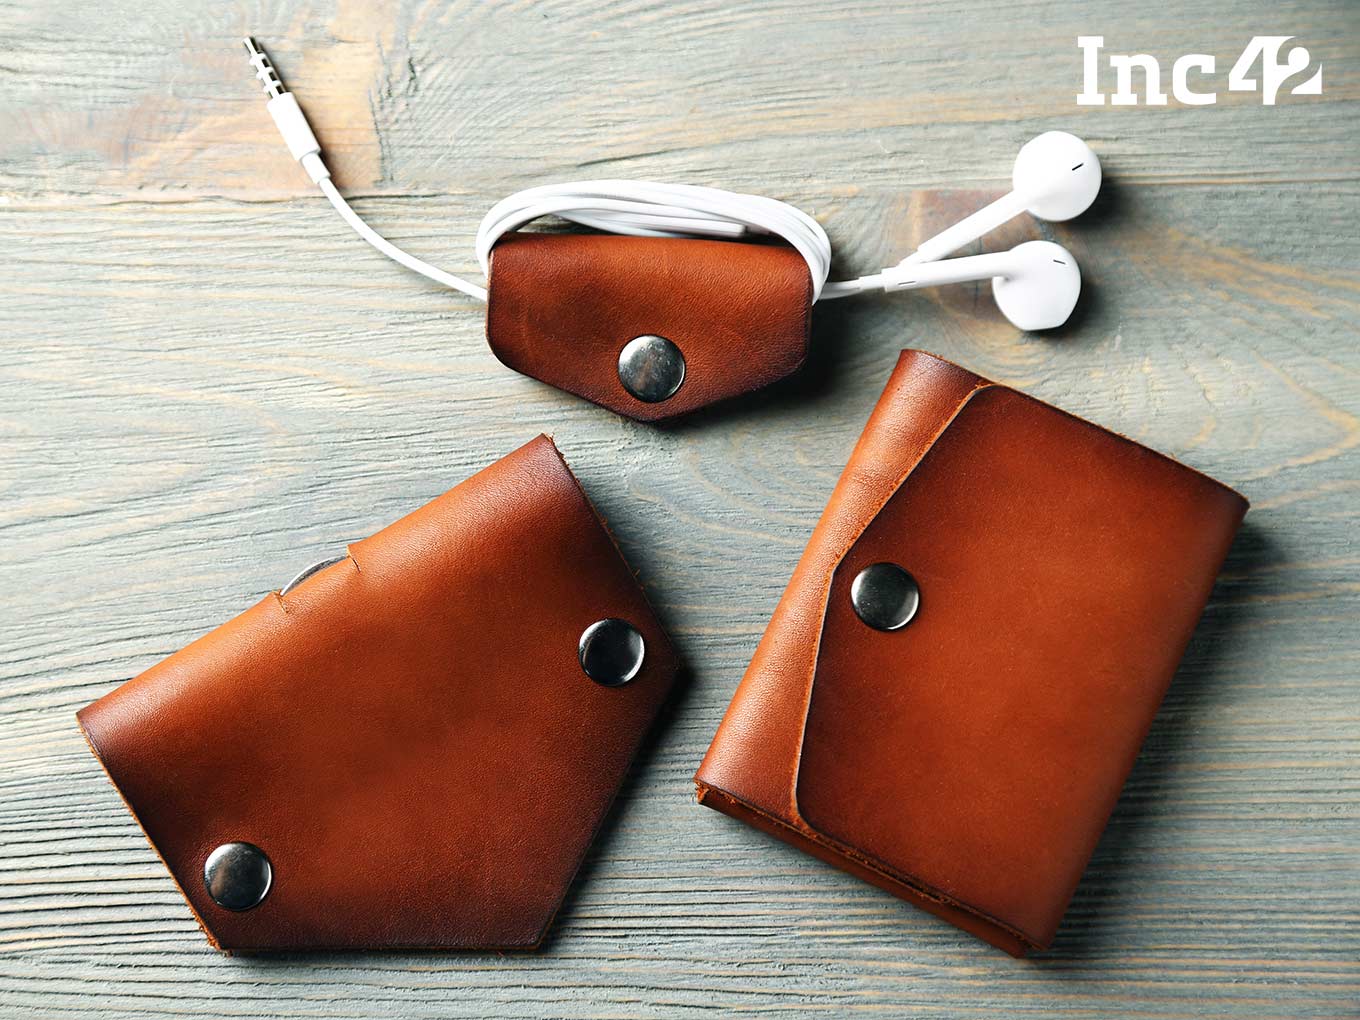 How A Startup Called ‘Brandless’ Is Making A Name For Its Ethical, Functional Leather Products